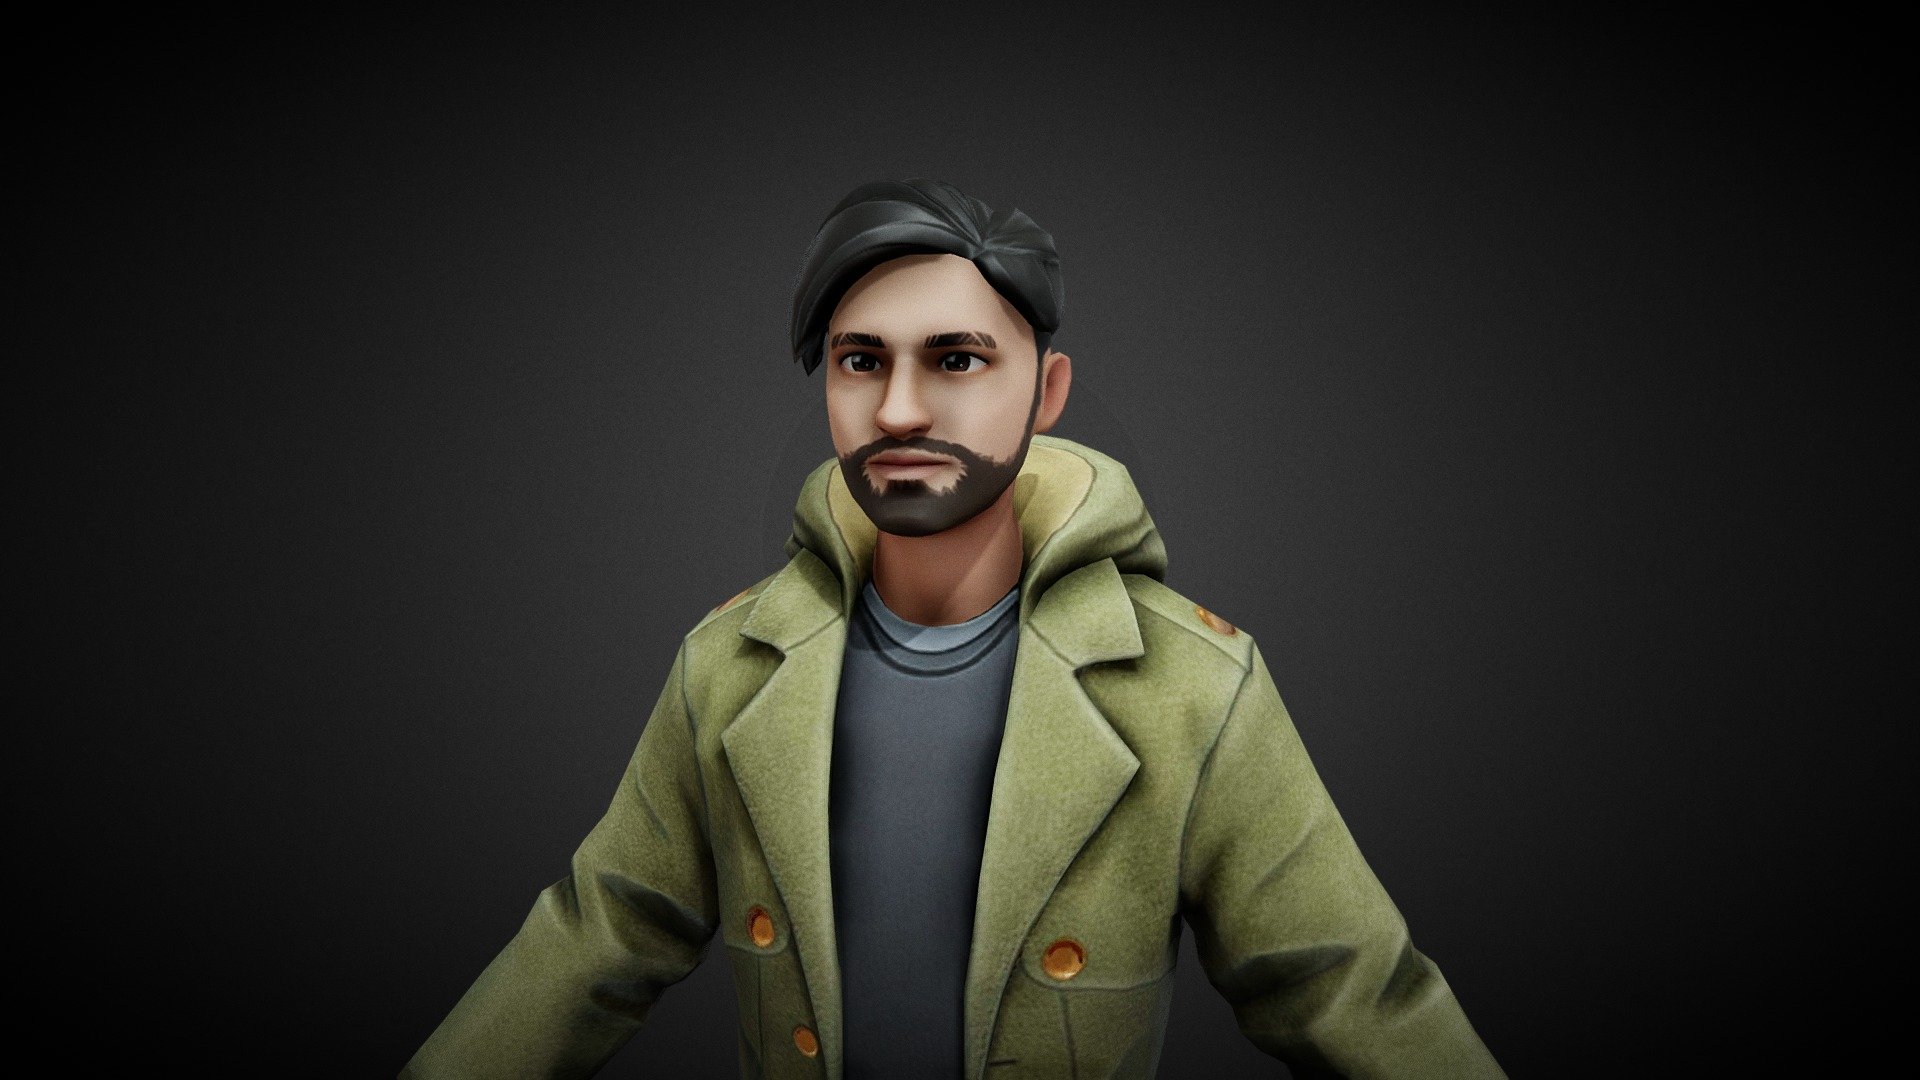 3D model of a Male Character

Free to use

No CopyRight Issue

For more 3D models for free,support us on youtube

Checkout our youtube channel BlendTek :https://www.youtube.com/channel/UC3fl4dO_6bd5YZ8VNO9vZRA
 - Rigged Character [Free] - Download Free 3D model by BlendTek (@namfd) 3d model